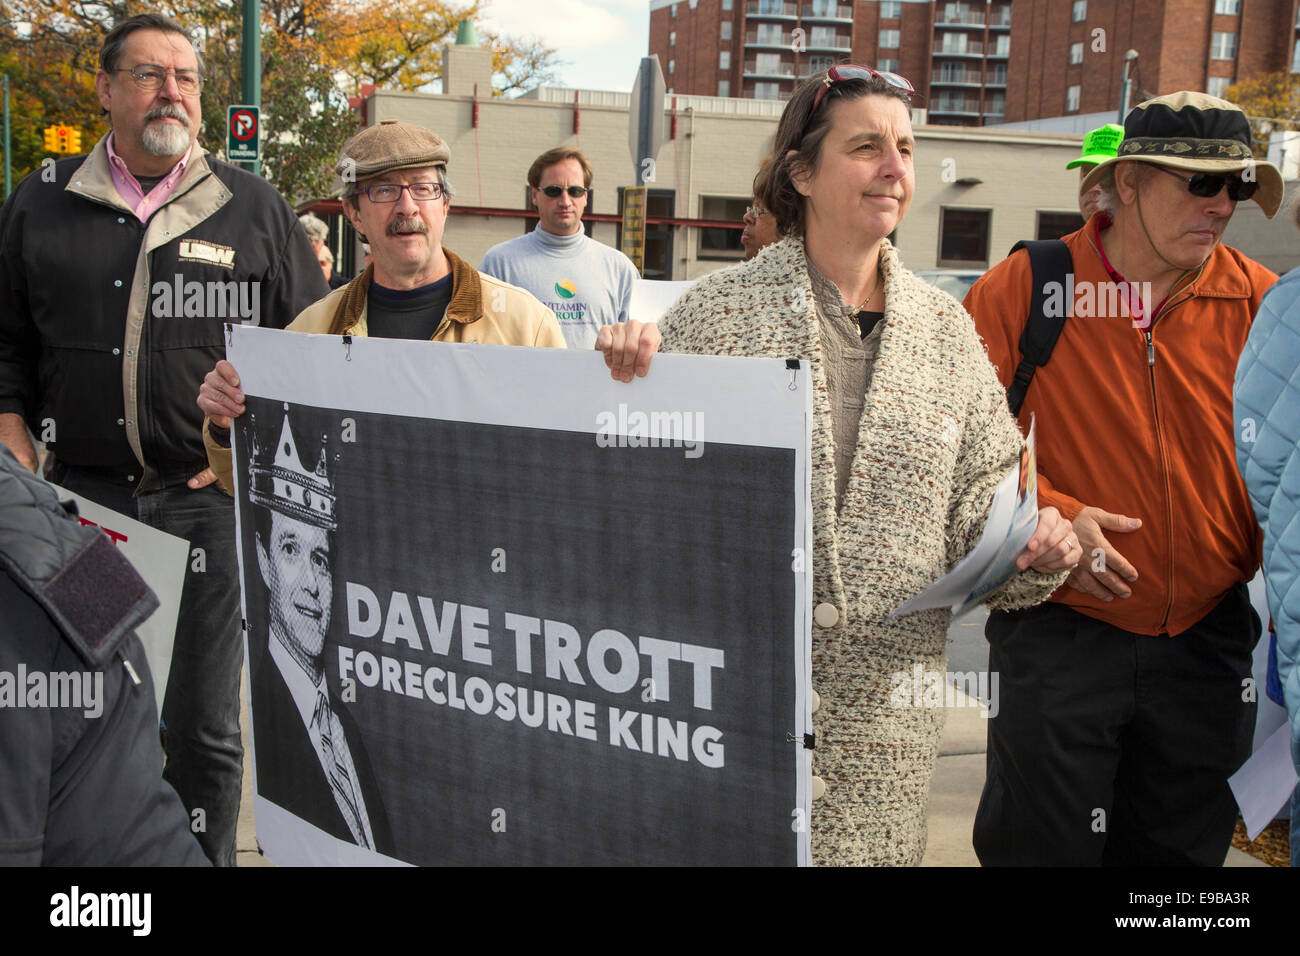 Birmingham, Michigan - People picket the office of David Trott, a prominent foreclosure lawyer, who is running for  Congress. Stock Photo